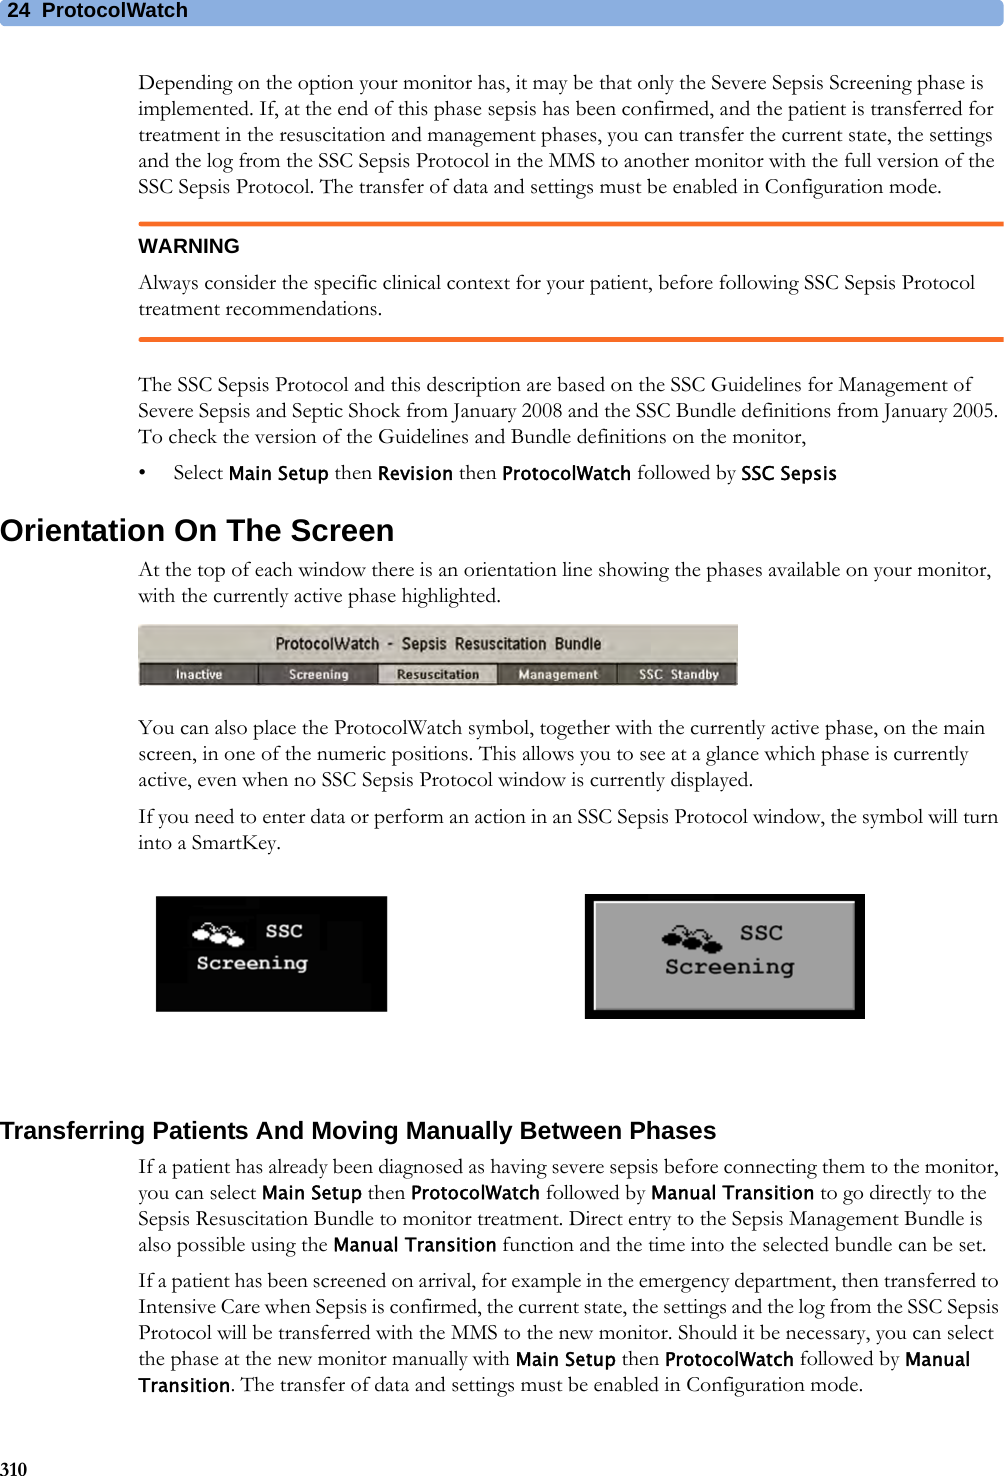 24 ProtocolWatch310Depending on the option your monitor has, it may be that only the Severe Sepsis Screening phase is implemented. If, at the end of this phase sepsis has been confirmed, and the patient is transferred for treatment in the resuscitation and management phases, you can transfer the current state, the settings and the log from the SSC Sepsis Protocol in the MMS to another monitor with the full version of the SSC Sepsis Protocol. The transfer of data and settings must be enabled in Configuration mode.WARNINGAlways consider the specific clinical context for your patient, before following SSC Sepsis Protocol treatment recommendations.The SSC Sepsis Protocol and this description are based on the SSC Guidelines for Management of Severe Sepsis and Septic Shock from January 2008 and the SSC Bundle definitions from January 2005. To check the version of the Guidelines and Bundle definitions on the monitor,•Select Main Setup then Revision then ProtocolWatch followed by SSC SepsisOrientation On The ScreenAt the top of each window there is an orientation line showing the phases available on your monitor, with the currently active phase highlighted.You can also place the ProtocolWatch symbol, together with the currently active phase, on the main screen, in one of the numeric positions. This allows you to see at a glance which phase is currently active, even when no SSC Sepsis Protocol window is currently displayed.If you need to enter data or perform an action in an SSC Sepsis Protocol window, the symbol will turn into a SmartKey.Transferring Patients And Moving Manually Between PhasesIf a patient has already been diagnosed as having severe sepsis before connecting them to the monitor, you can select Main Setup then ProtocolWatch followed by Manual Transition to go directly to the Sepsis Resuscitation Bundle to monitor treatment. Direct entry to the Sepsis Management Bundle is also possible using the Manual Transition function and the time into the selected bundle can be set.If a patient has been screened on arrival, for example in the emergency department, then transferred to Intensive Care when Sepsis is confirmed, the current state, the settings and the log from the SSC Sepsis Protocol will be transferred with the MMS to the new monitor. Should it be necessary, you can select the phase at the new monitor manually with Main Setup then ProtocolWatch followed by Manual Transition. The transfer of data and settings must be enabled in Configuration mode.